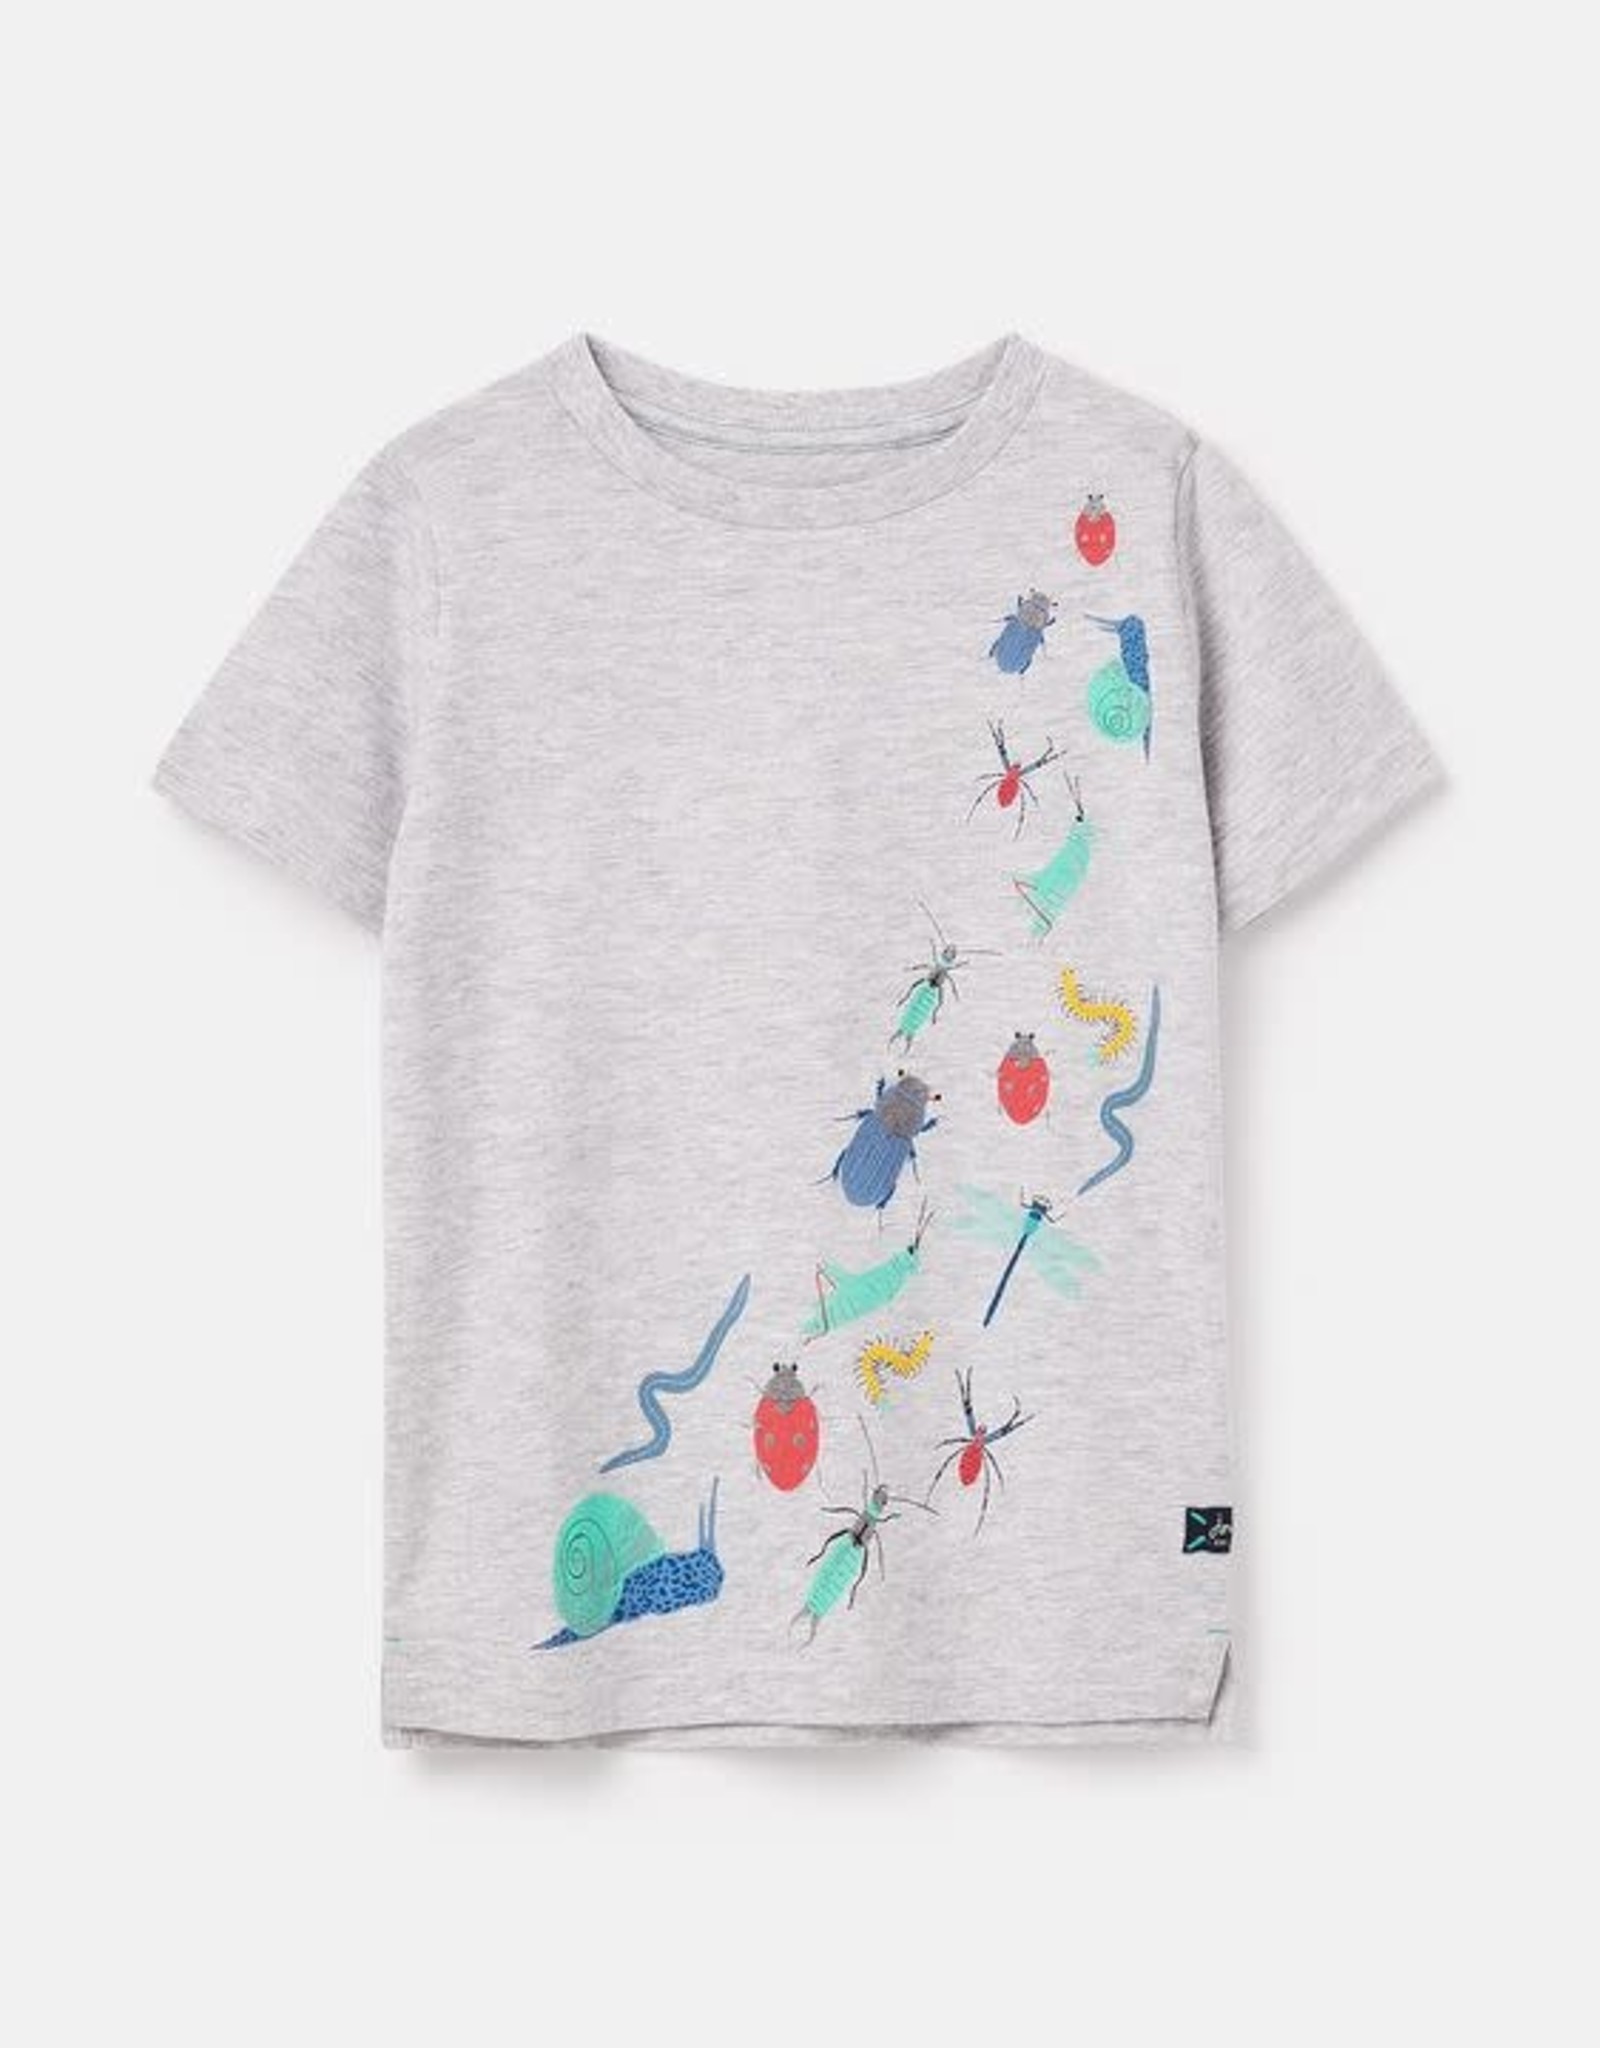 Joules T-Shirt, Bugs